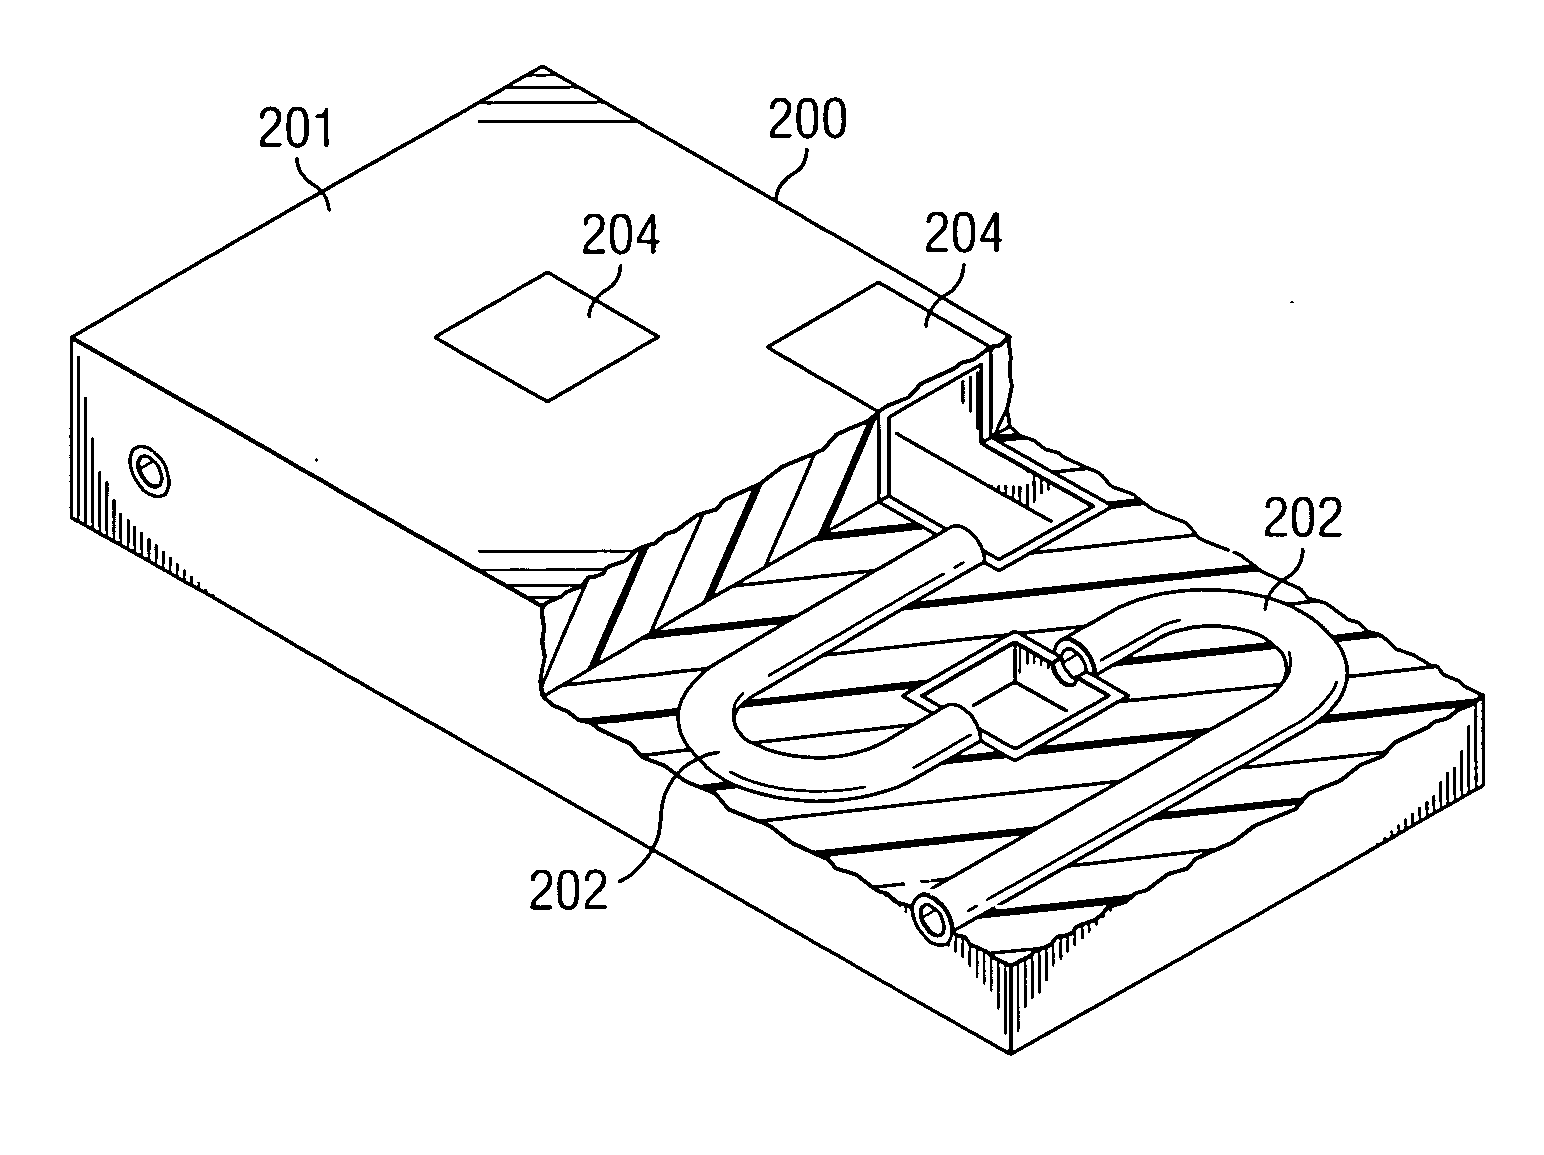 Thermal management system and method for electronic equipment mounted on coldplates